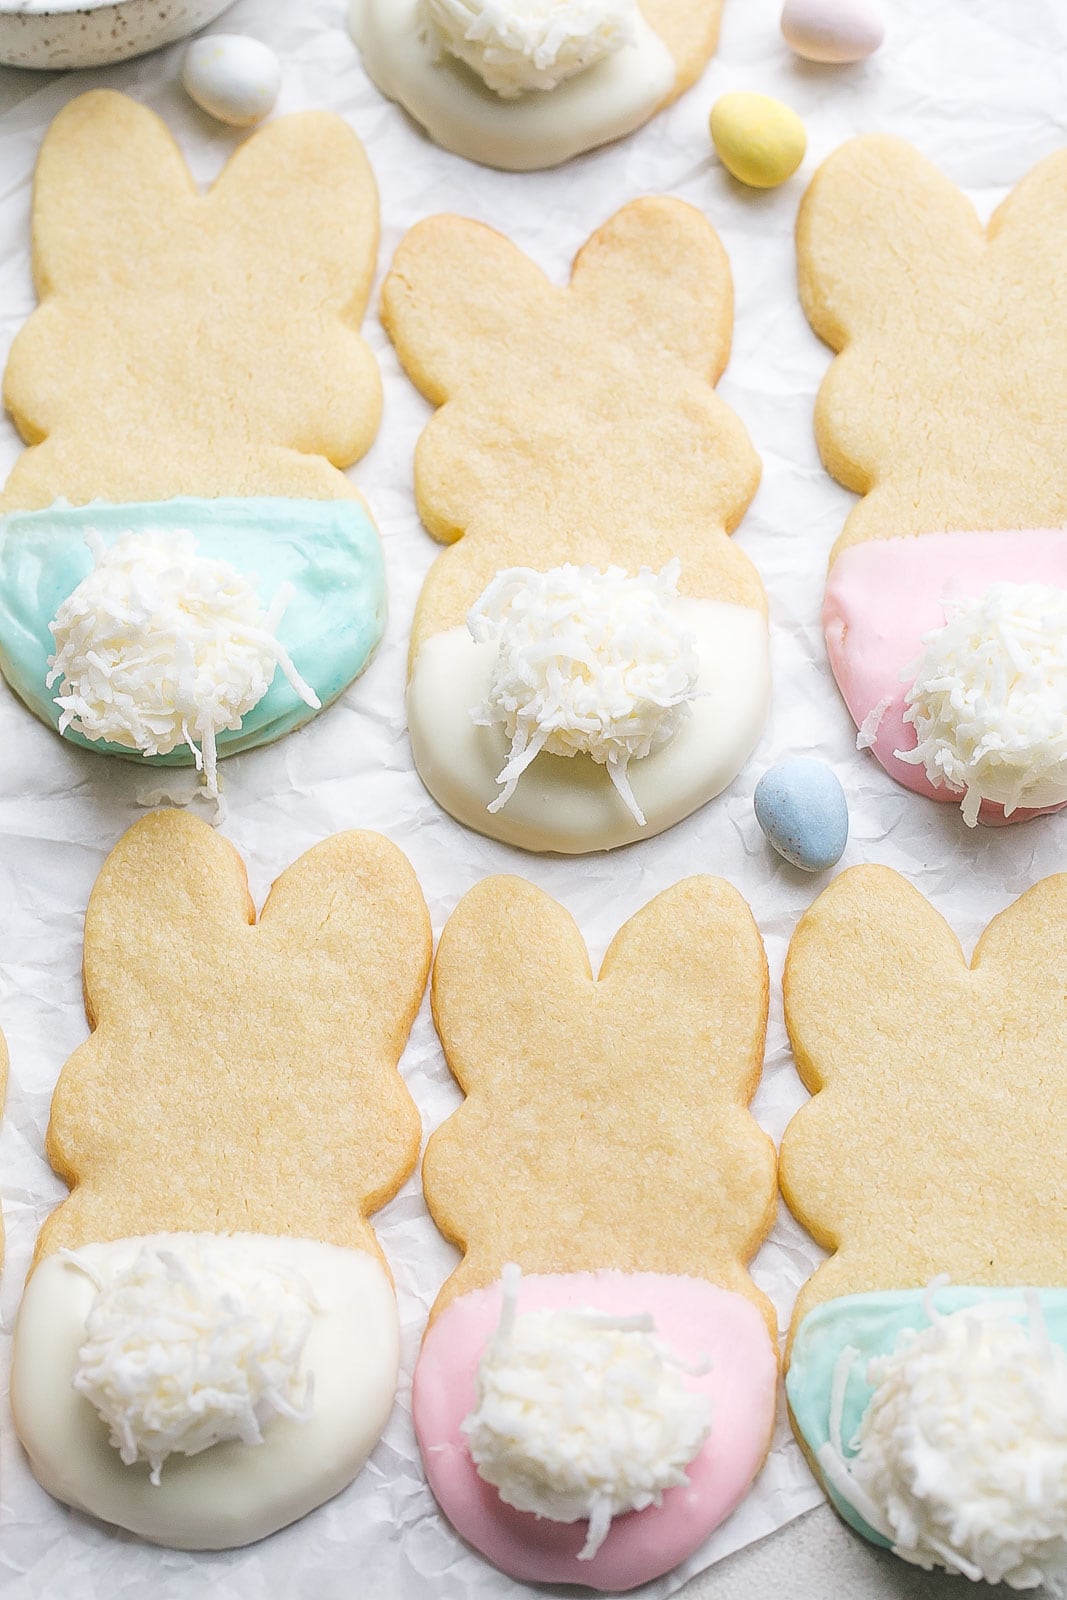 Adorable cookies shaped into bunnies.